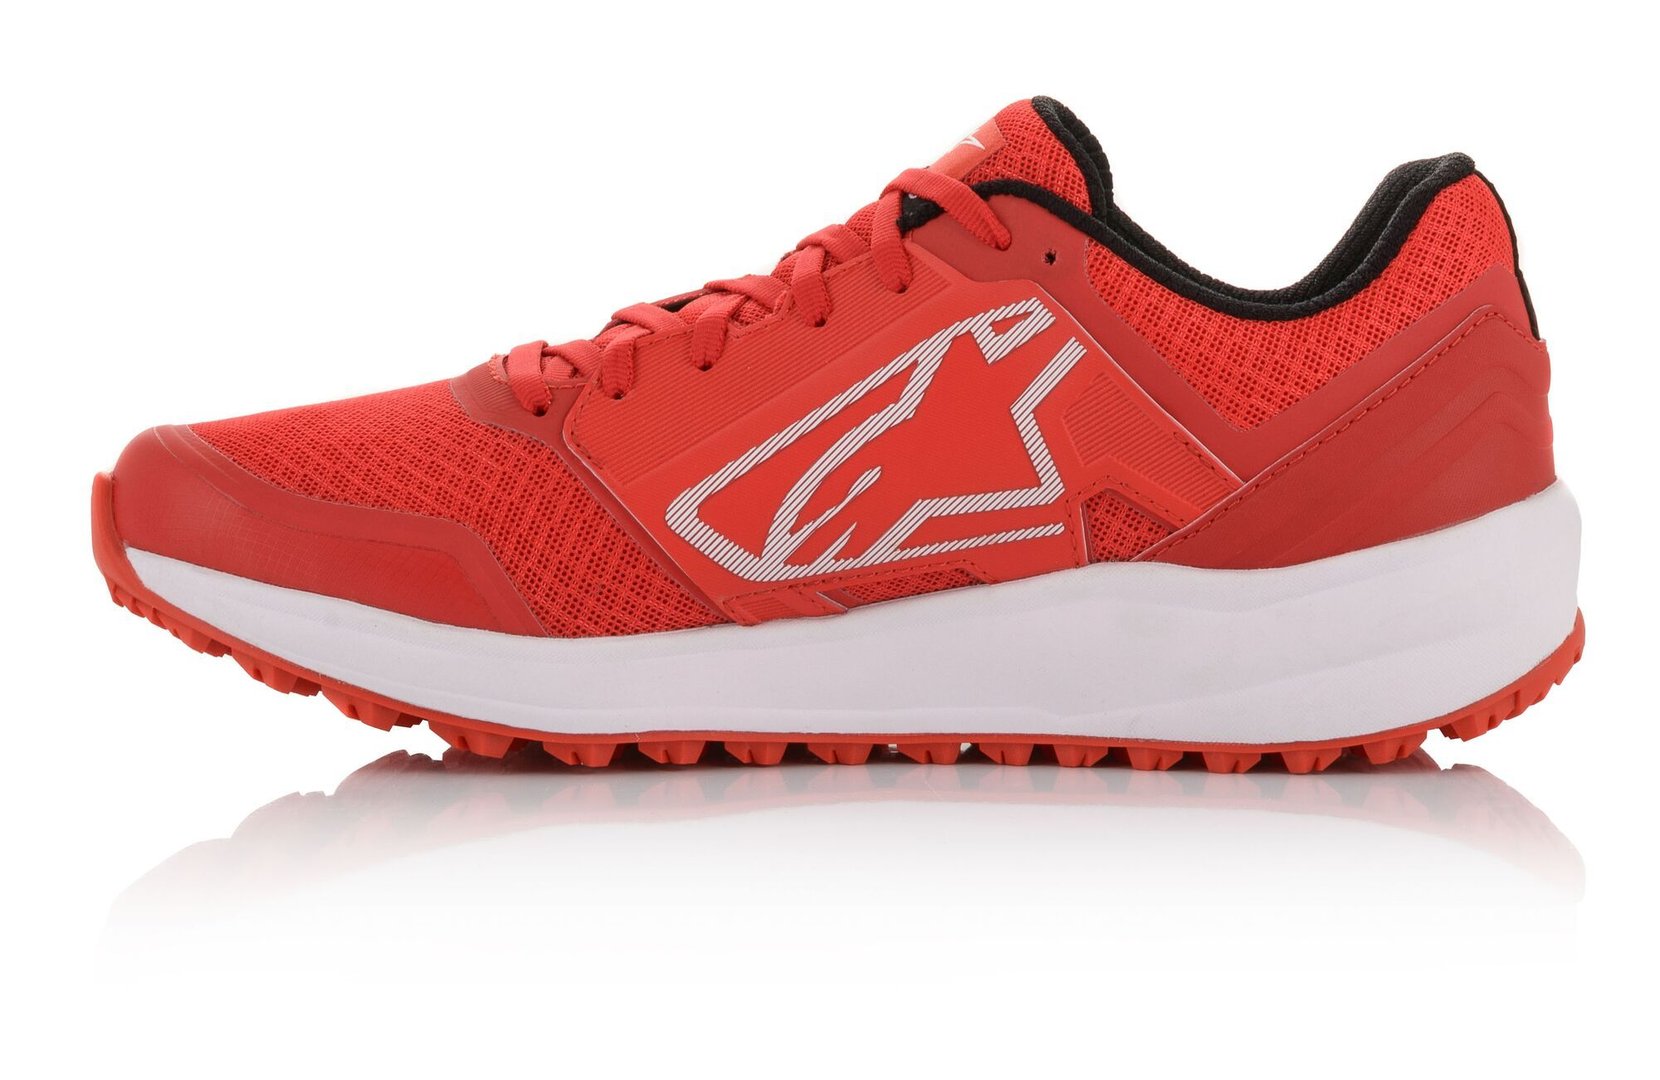 ALPINESTARS 2654820_32_12 META TRAIL RUNNING shoes, red/white, size 45,5 (12) (Фото-3)